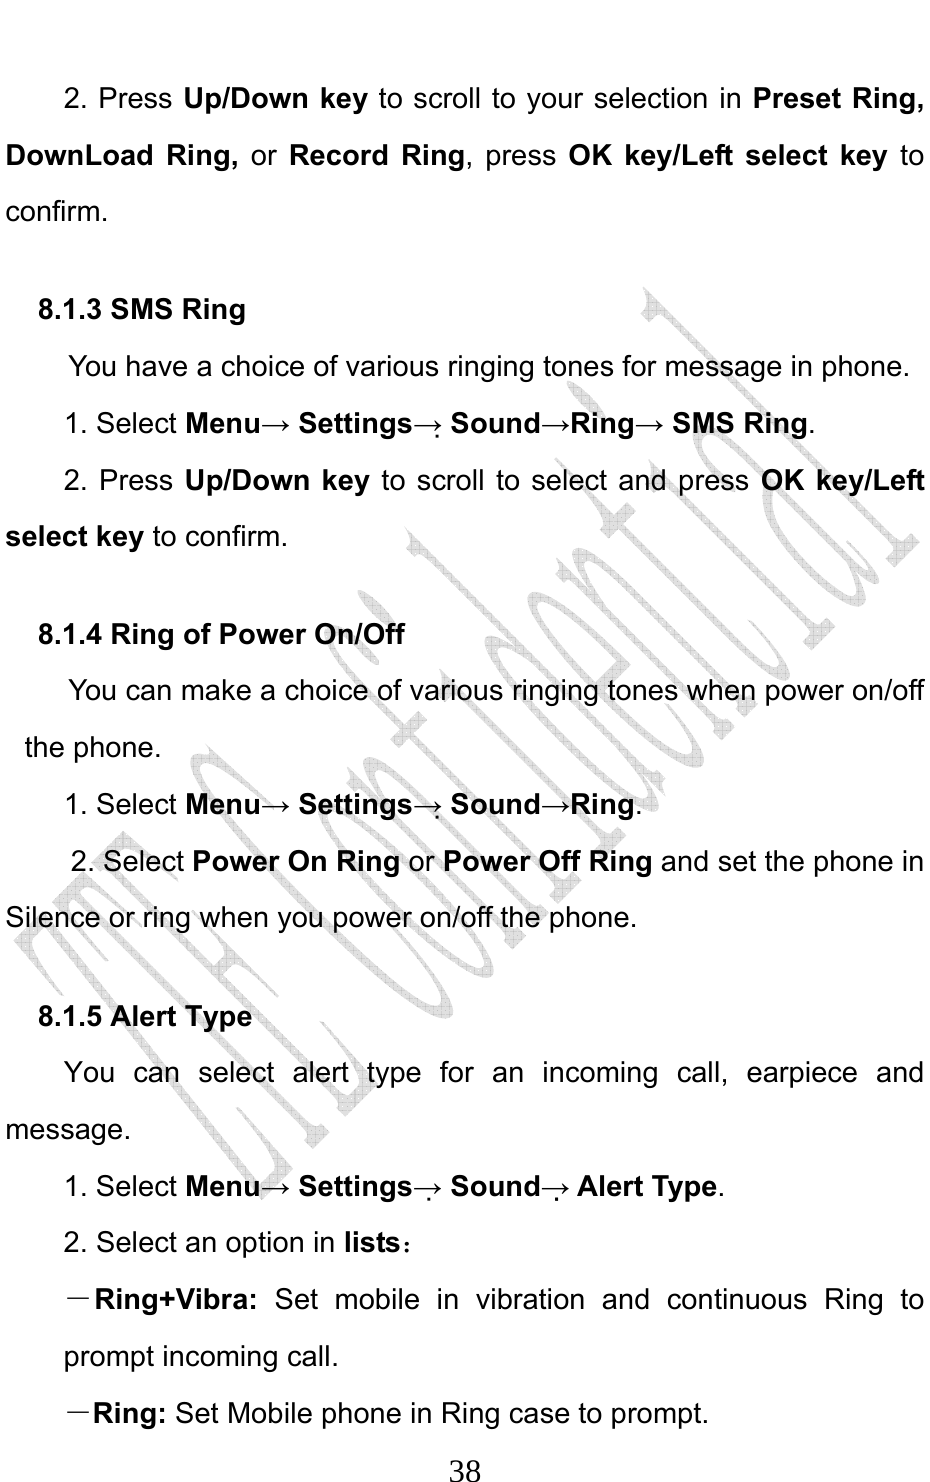                              382. Press Up/Down key to scroll to your selection in Preset Ring, DownLoad Ring, or Record Ring, press OK key/Left select key to confirm. 8.1.3 SMS Ring   You have a choice of various ringing tones for message in phone.   1. Select Menu→ Settings→ Sound→Ring→ SMS Ring.  2. Press Up/Down key to scroll to select and press OK key/Left select key to confirm. 8.1.4 Ring of Power On/Off You can make a choice of various ringing tones when power on/off the phone.   1. Select Menu→ Settings→ Sound→Ring.  2. Select Power On Ring or Power Off Ring and set the phone in Silence or ring when you power on/off the phone. 8.1.5 Alert Type You can select alert type for an incoming call, earpiece and message. 1. Select Menu→ Settings→ Sound→ Alert Type. 2. Select an option in lists： －Ring+Vibra:  Set mobile in vibration and continuous Ring to prompt incoming call.   －Ring: Set Mobile phone in Ring case to prompt. 